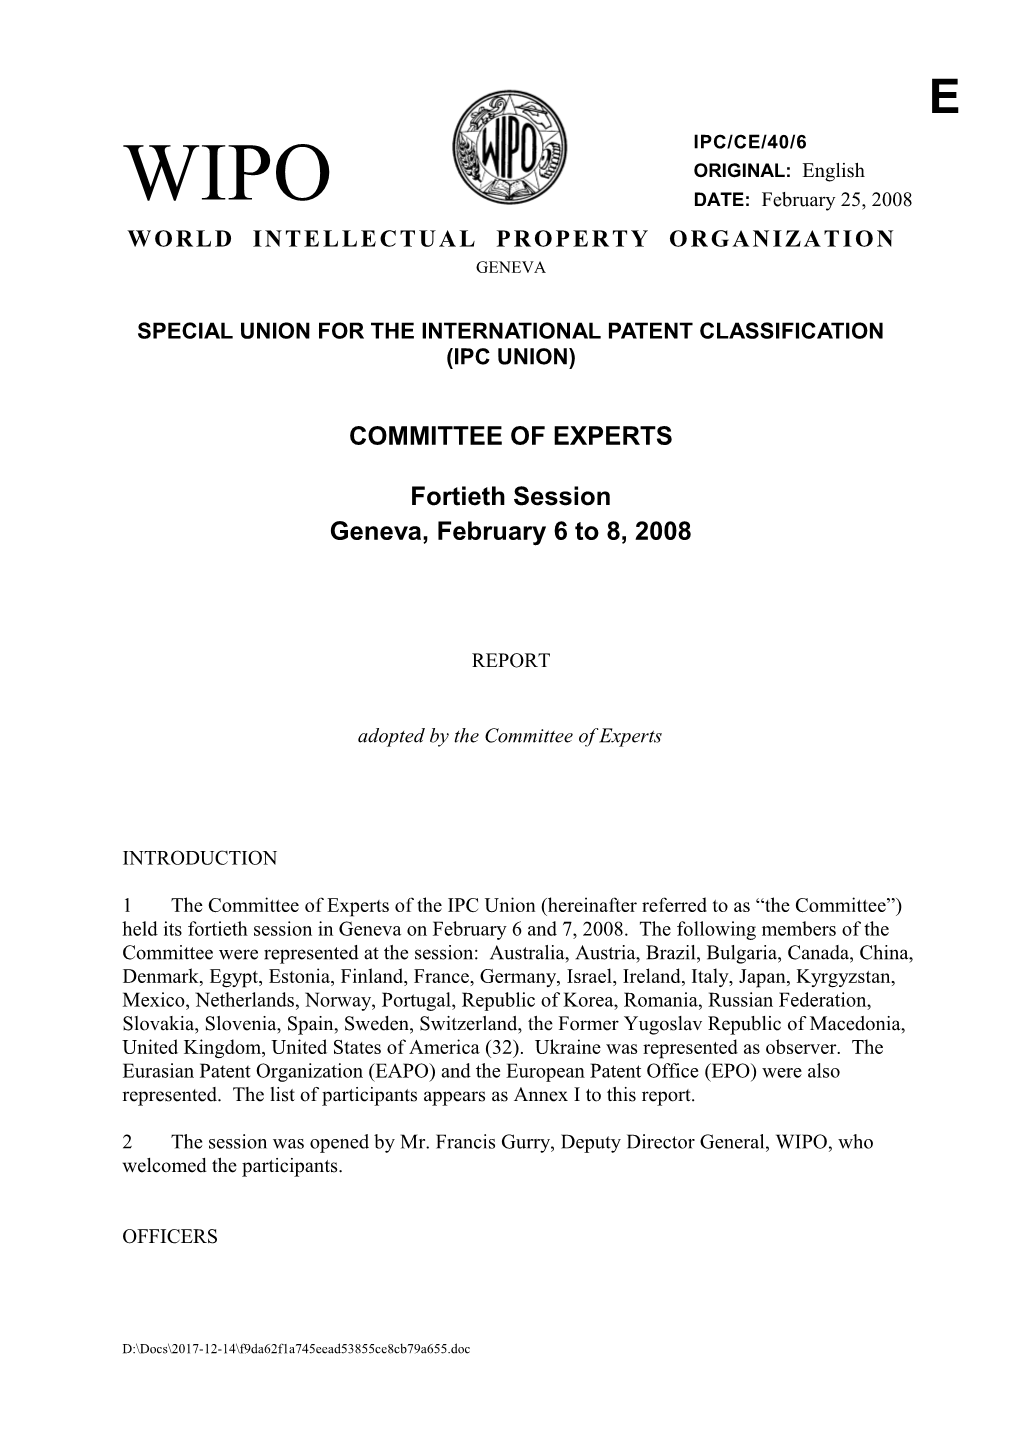 Document IPC/CE/40/6 - Report, 40Th Session of the IPC Committee of Experts